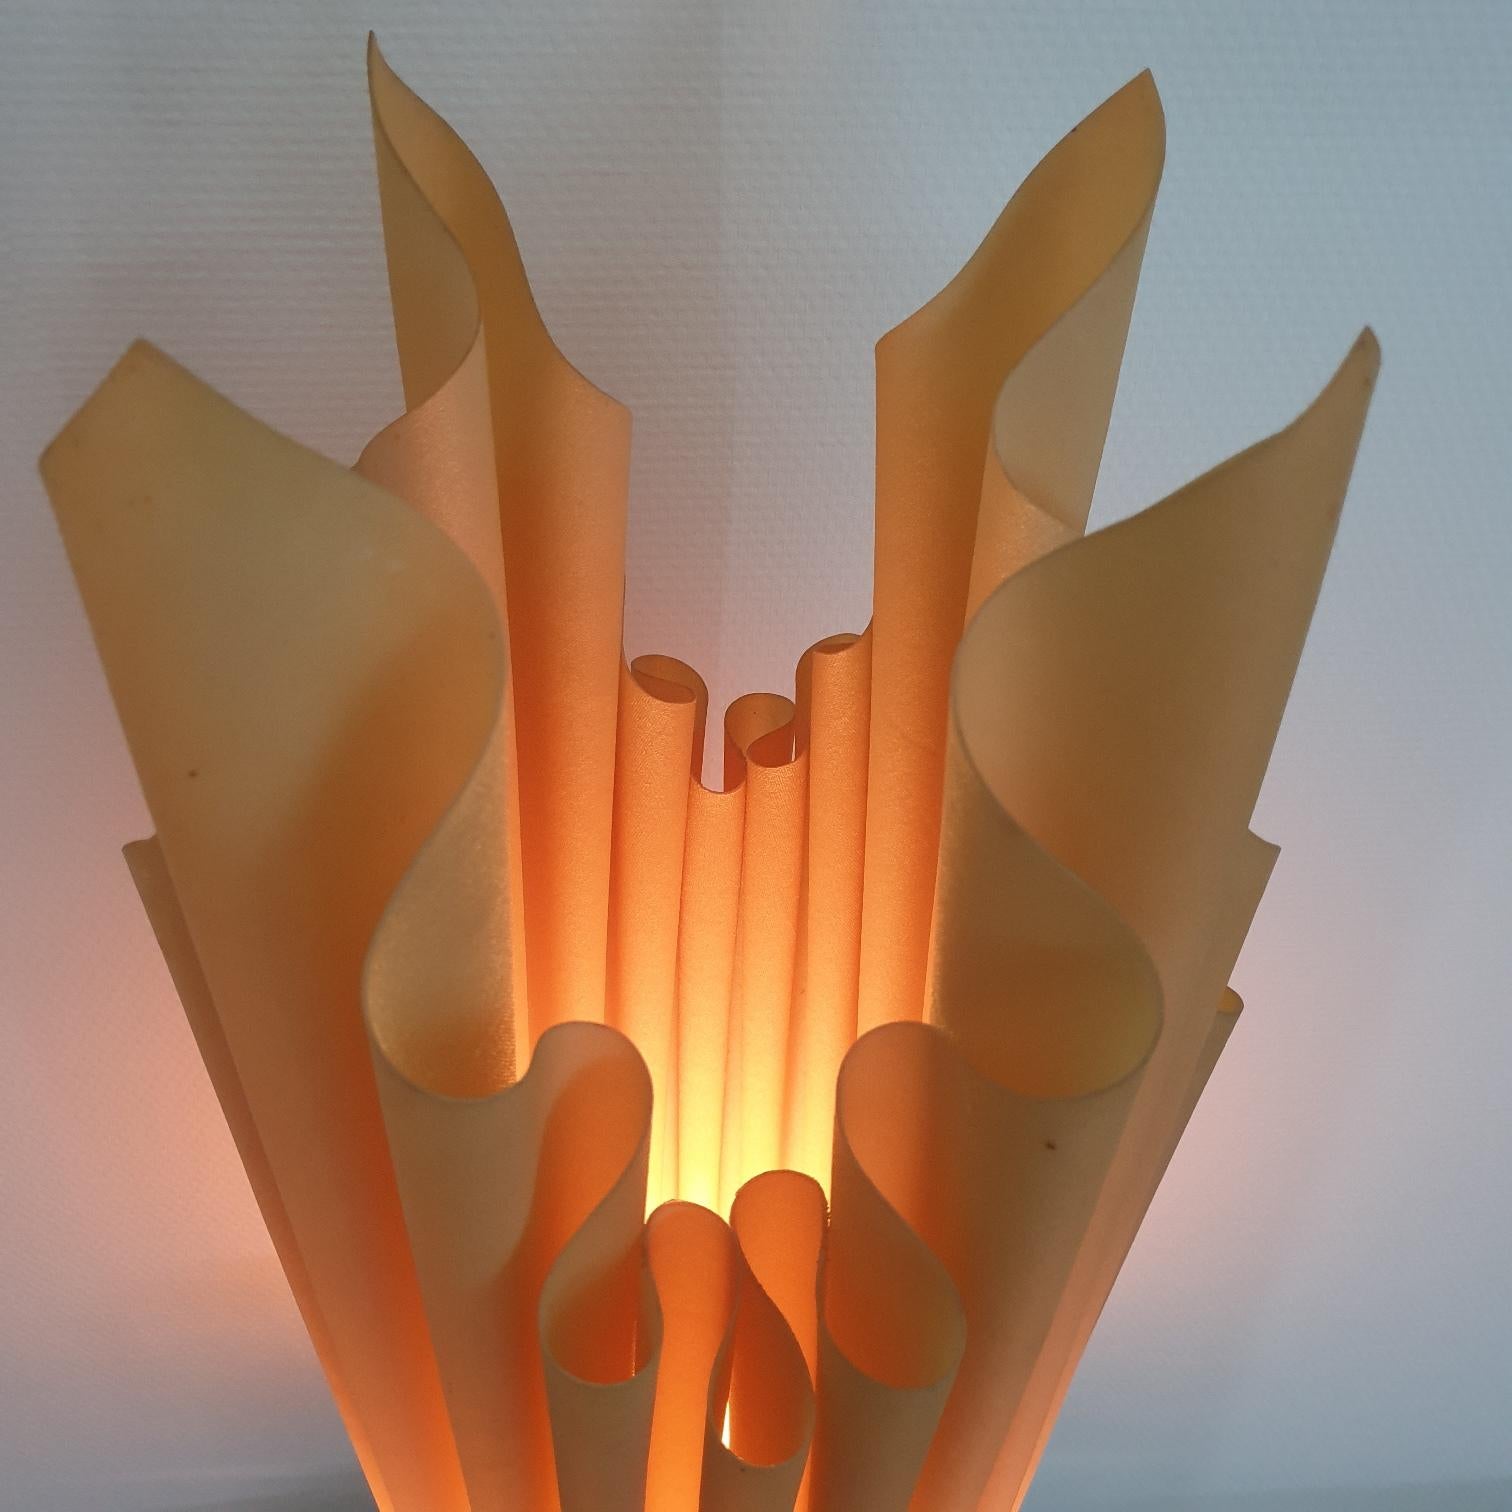 Large table lamp by Georgia Jacob, 1970s.
Inspired by the shapes of a flaming torch.
With one E27 fitting.